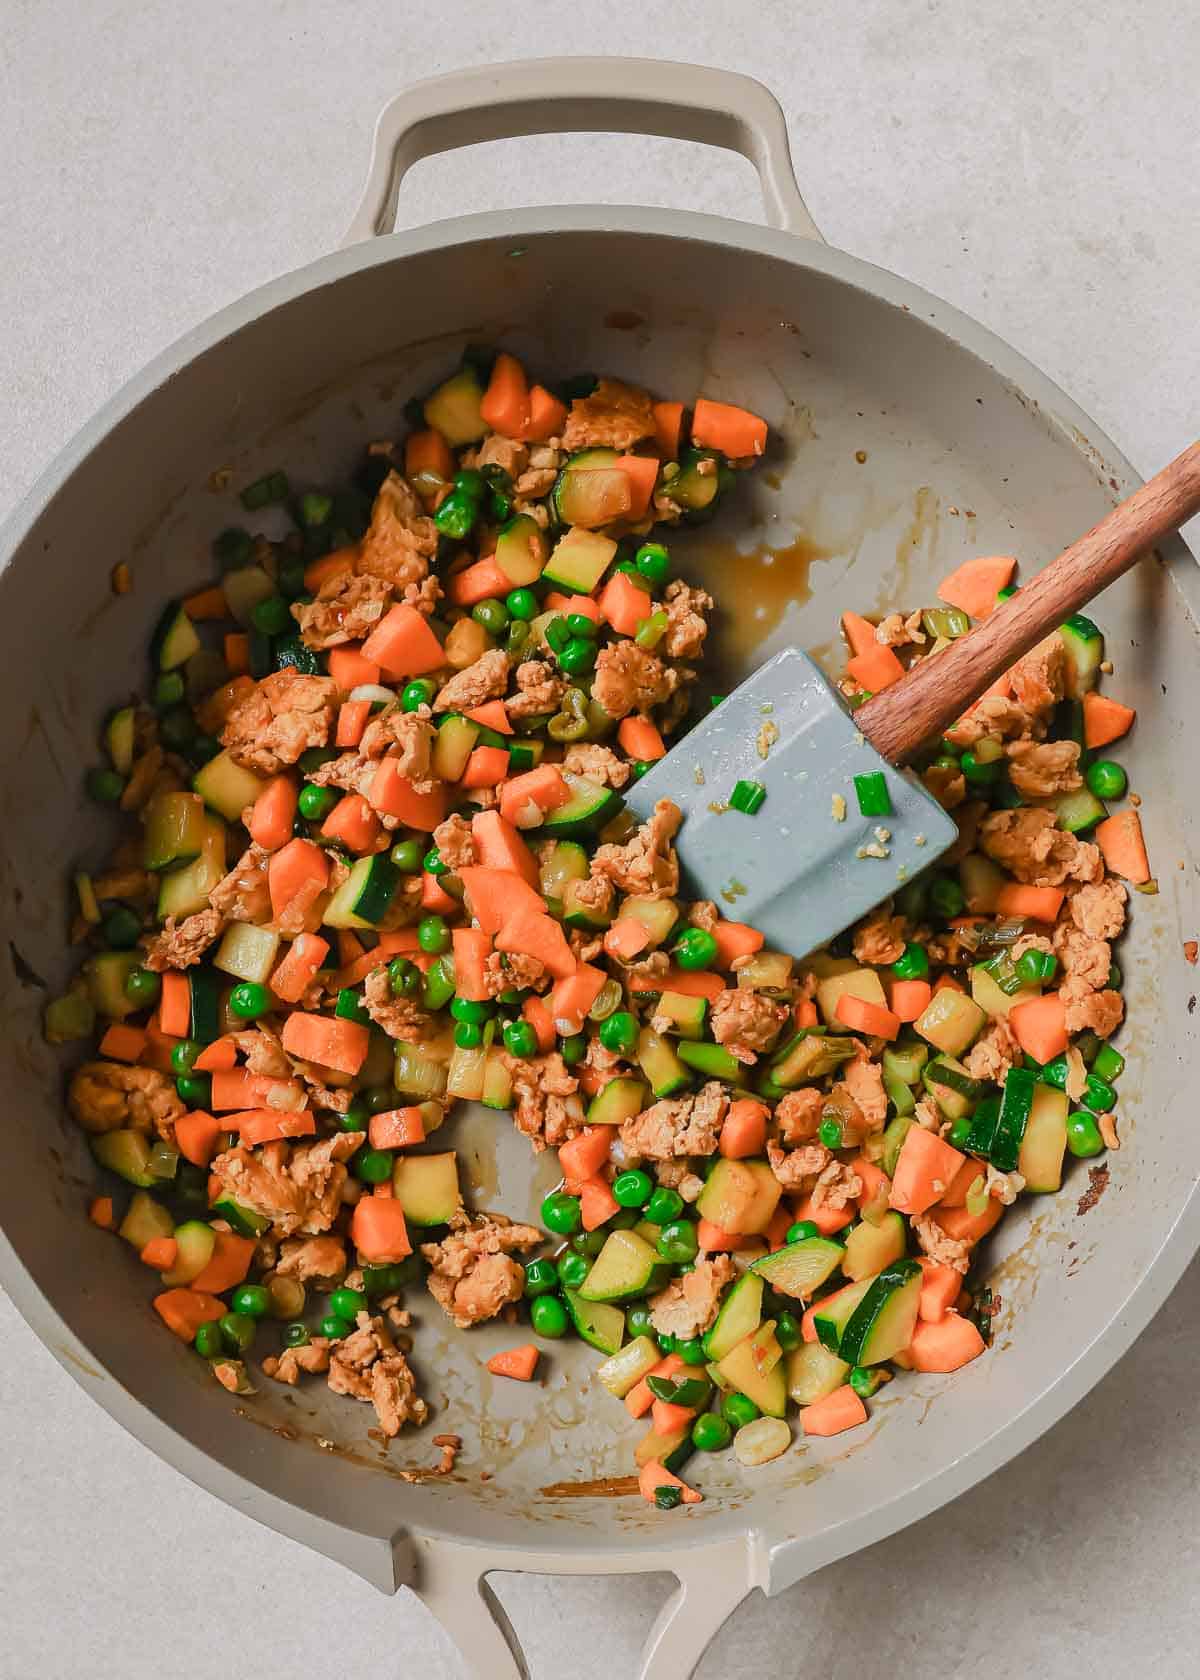 Stir-fried vegetables in a wok with a wooden spatula.